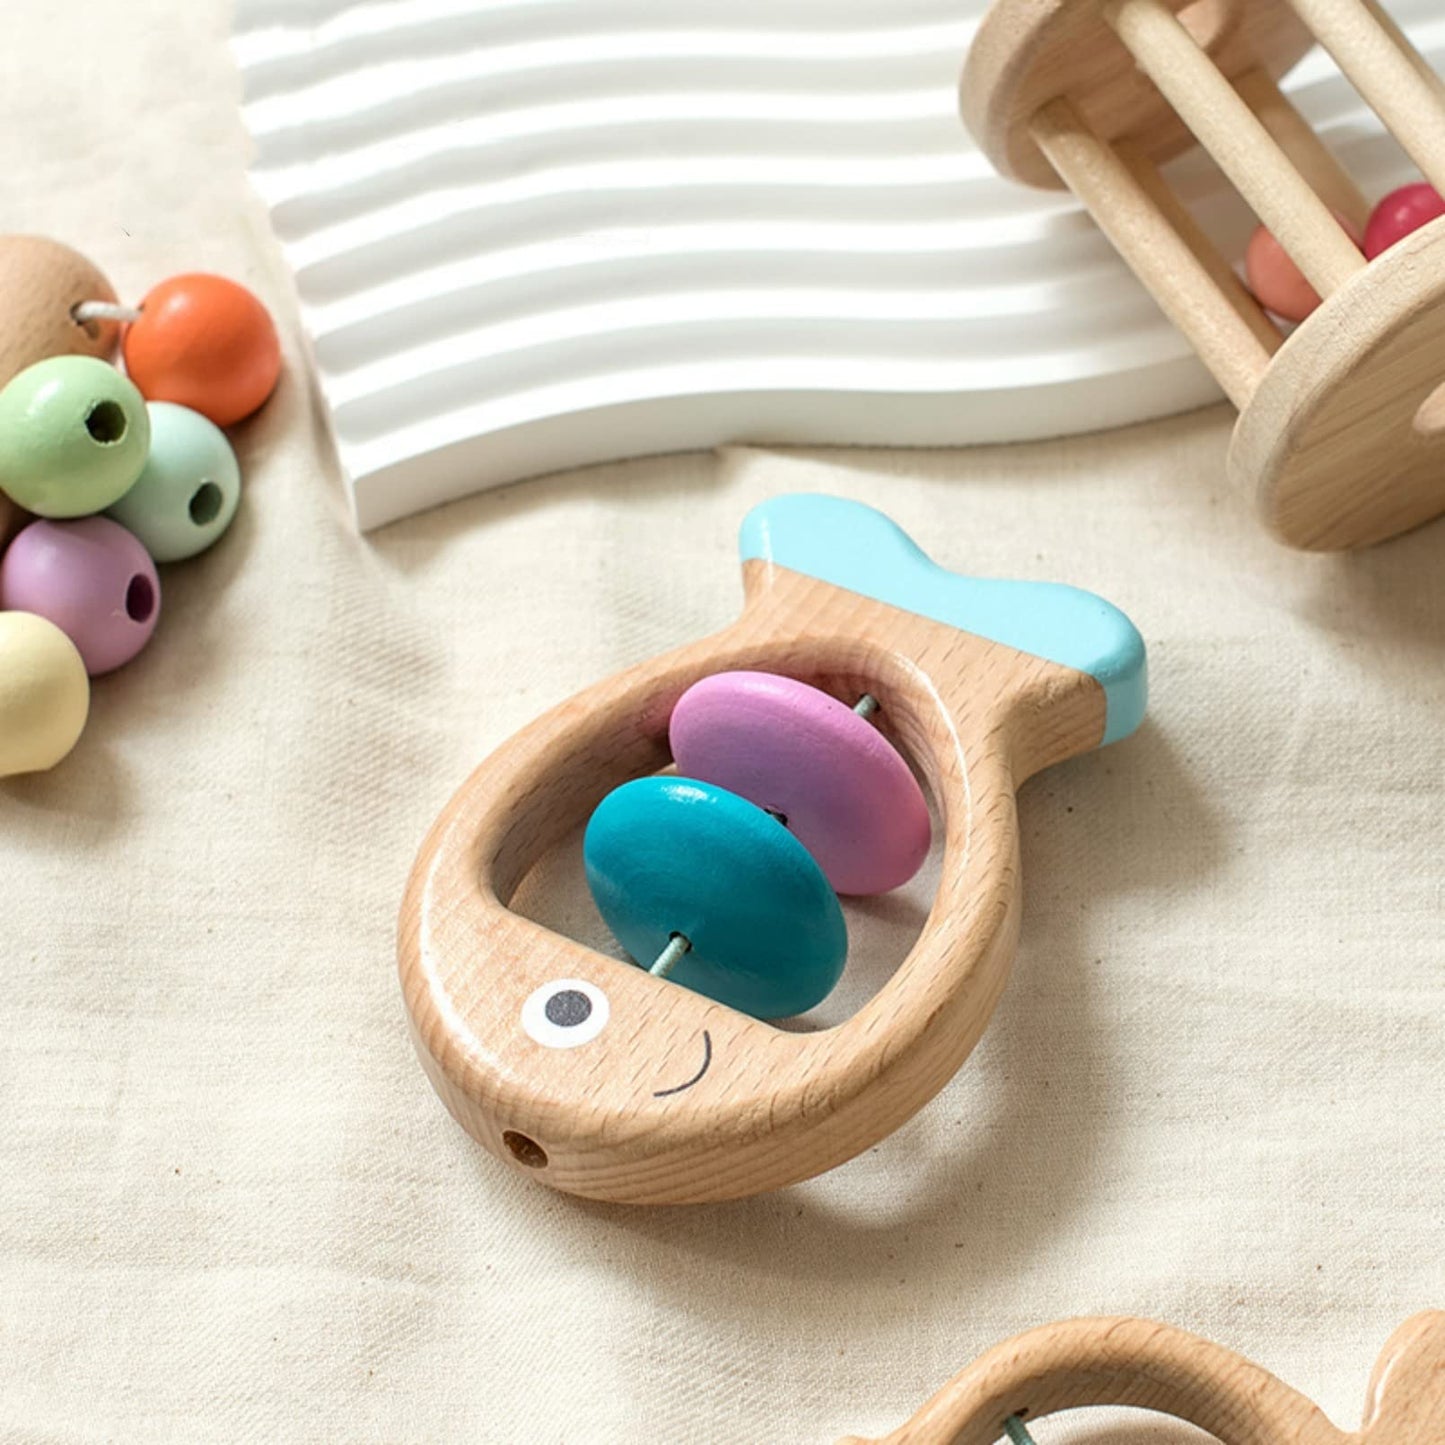 AM ANNA Wooden Rattle for Baby 0-6 months ,5 Pcs Wooden Baby Rattle Toy with Bells,Rolling Rattles,Montessori Wood Baby Dog for Newborns Infant Boys and Girls Gifts